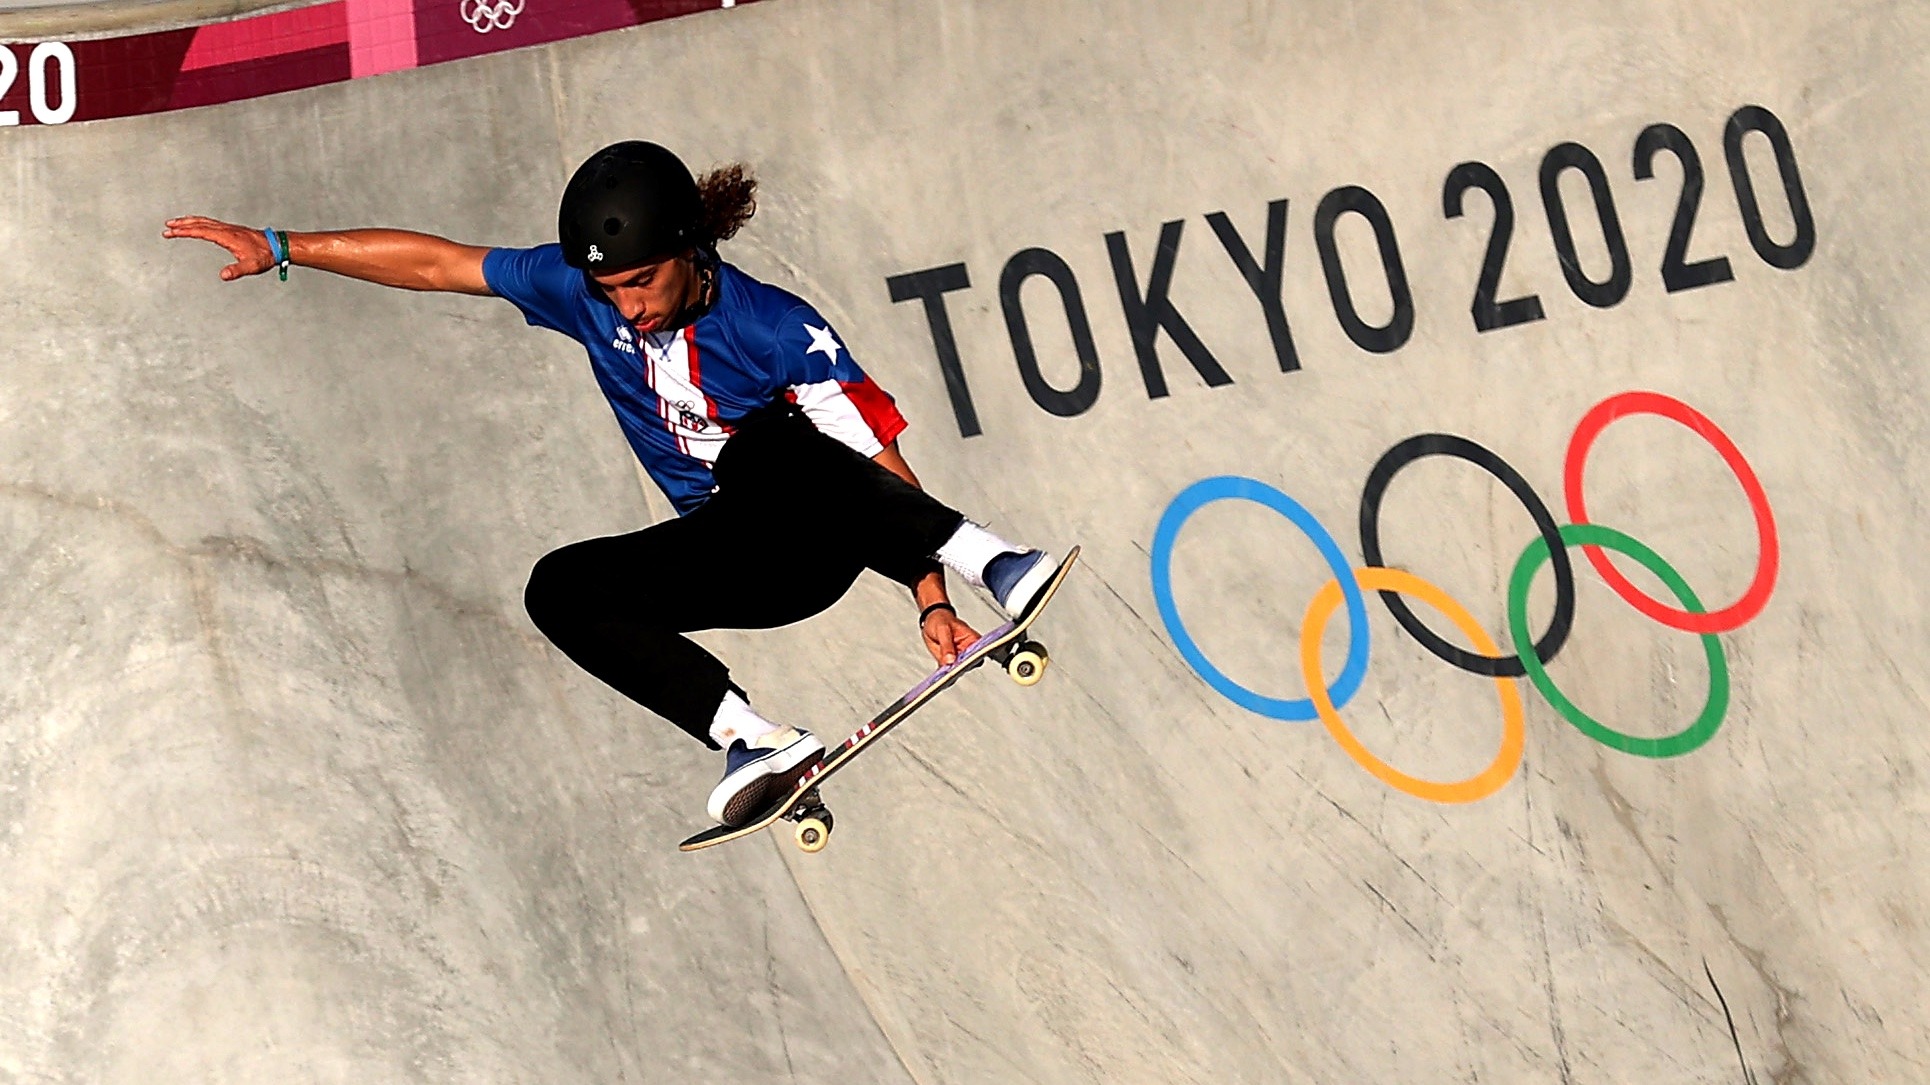 Skateboard: from Fringe to Olympic Sport